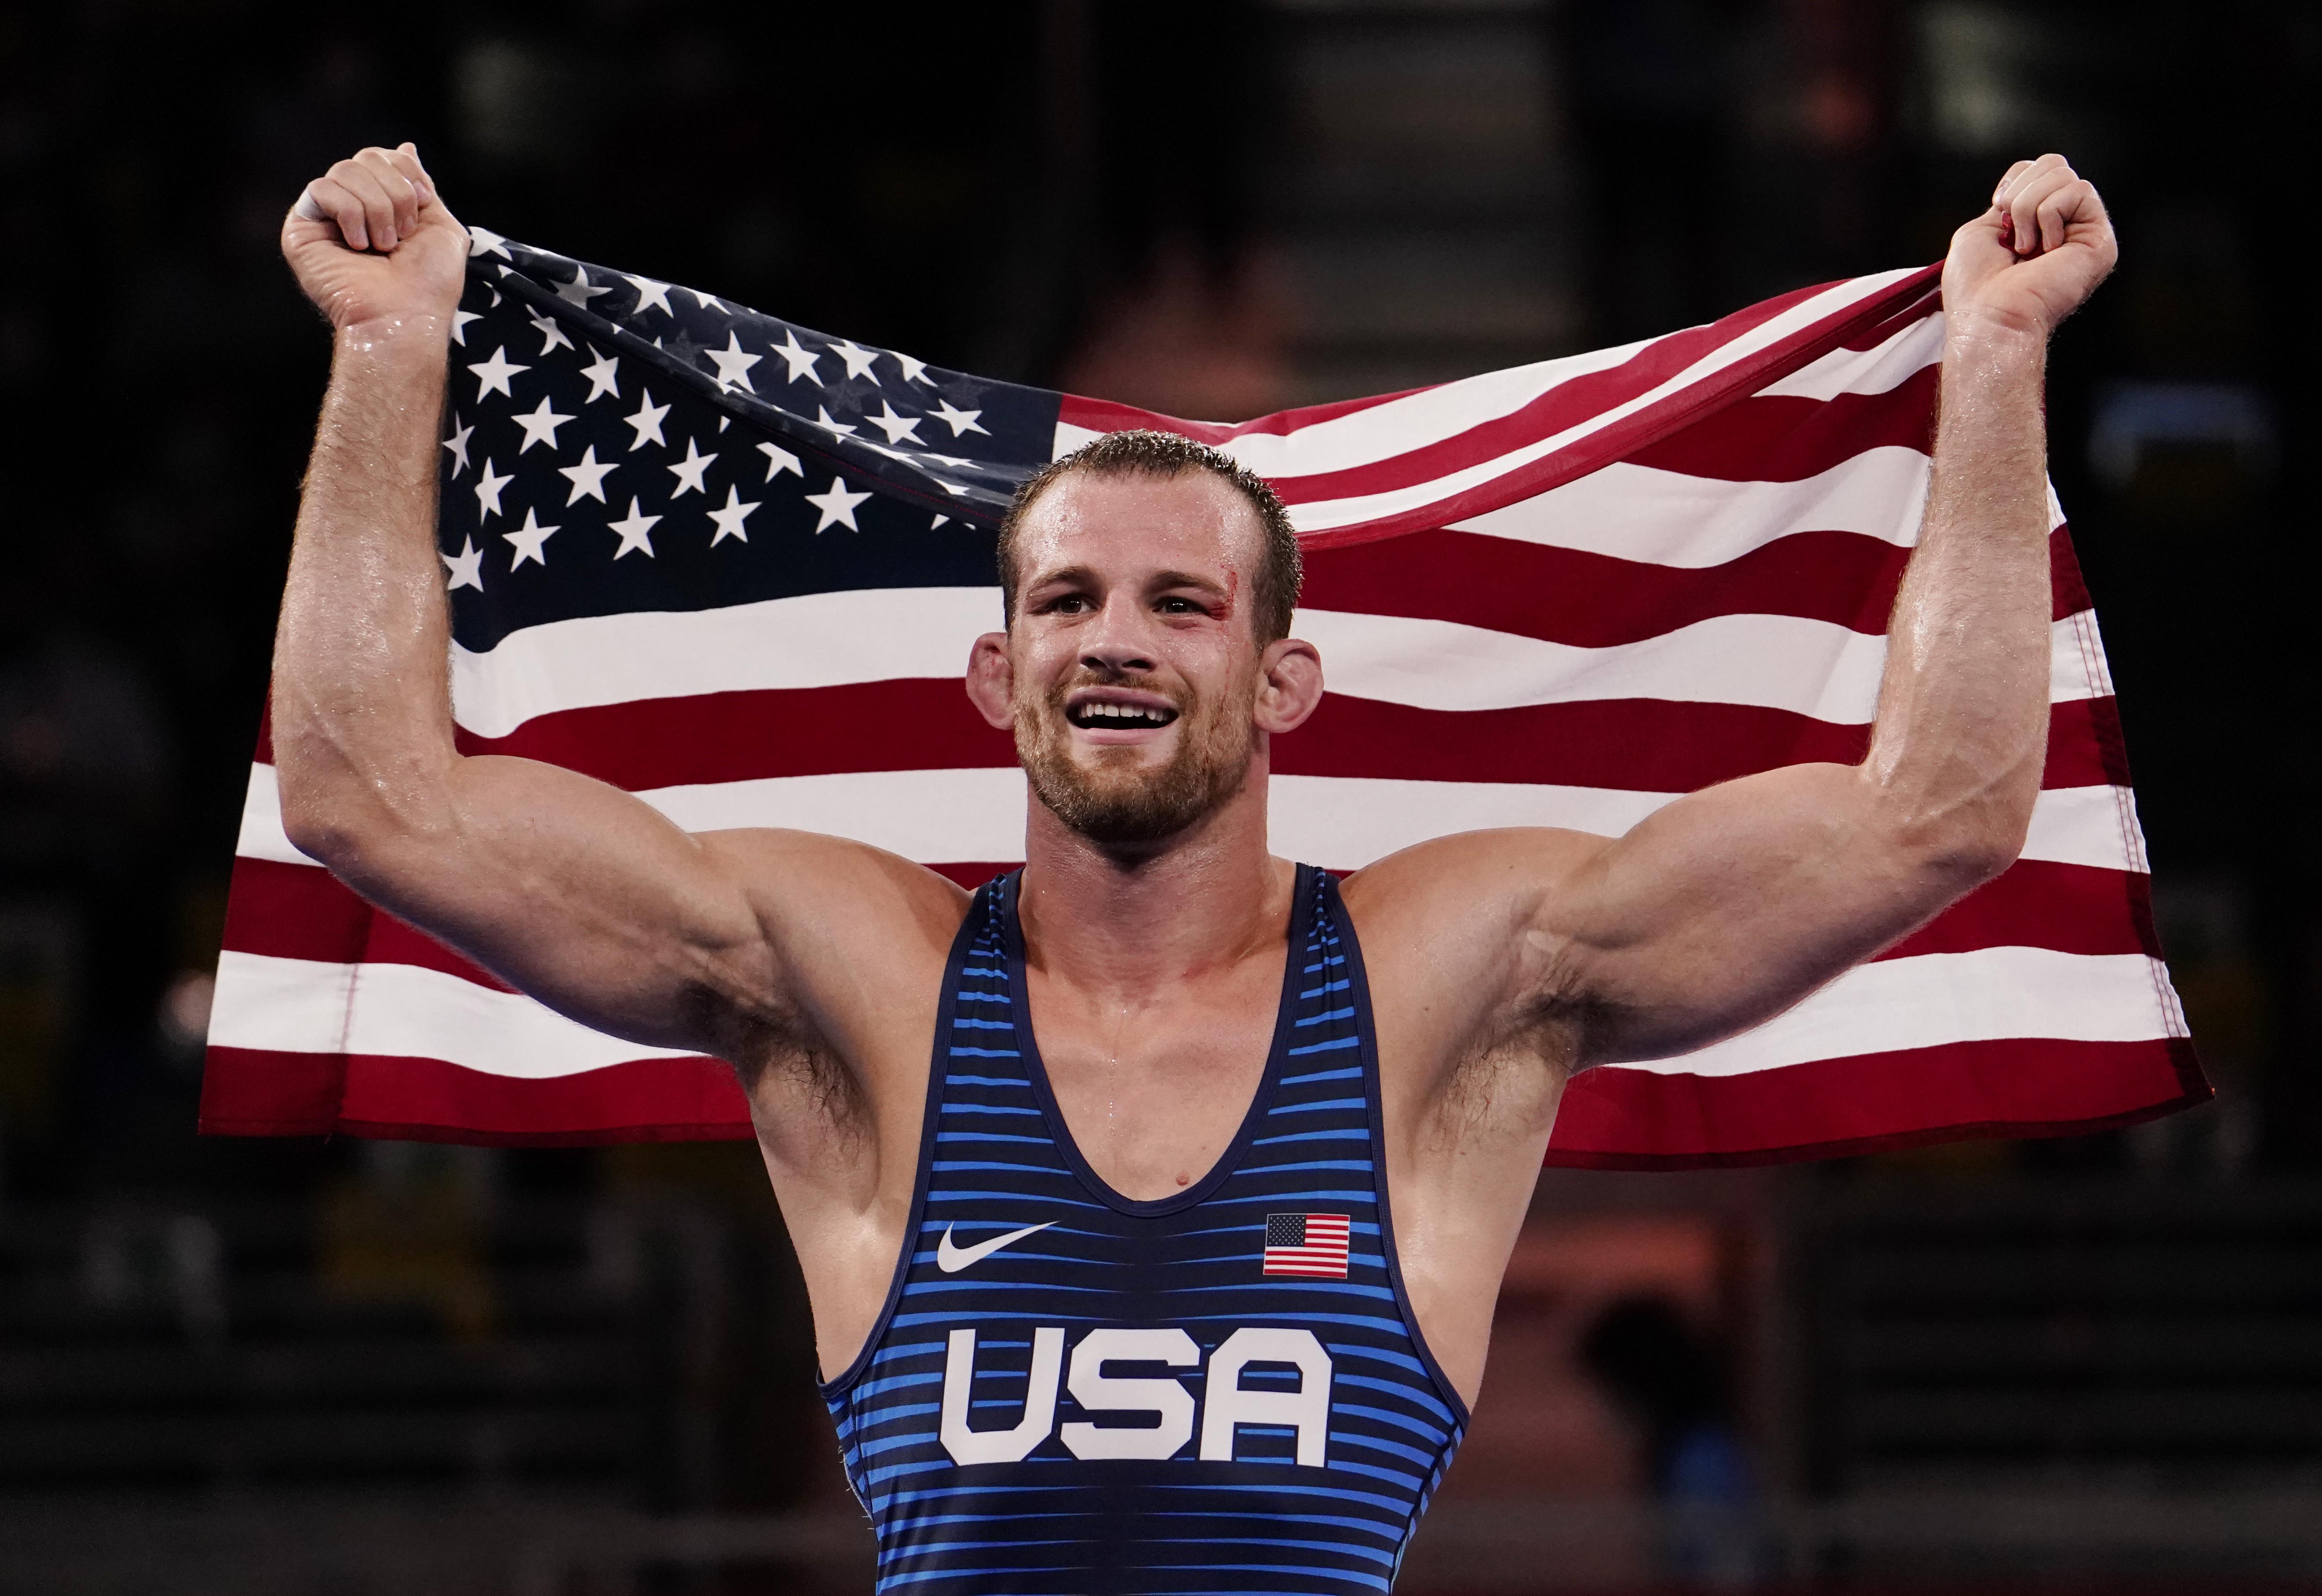 U.S. Wrestler David Taylor Defeats Hassan Yazdani for the 86kg freestyle gold medal at the Tokyo 